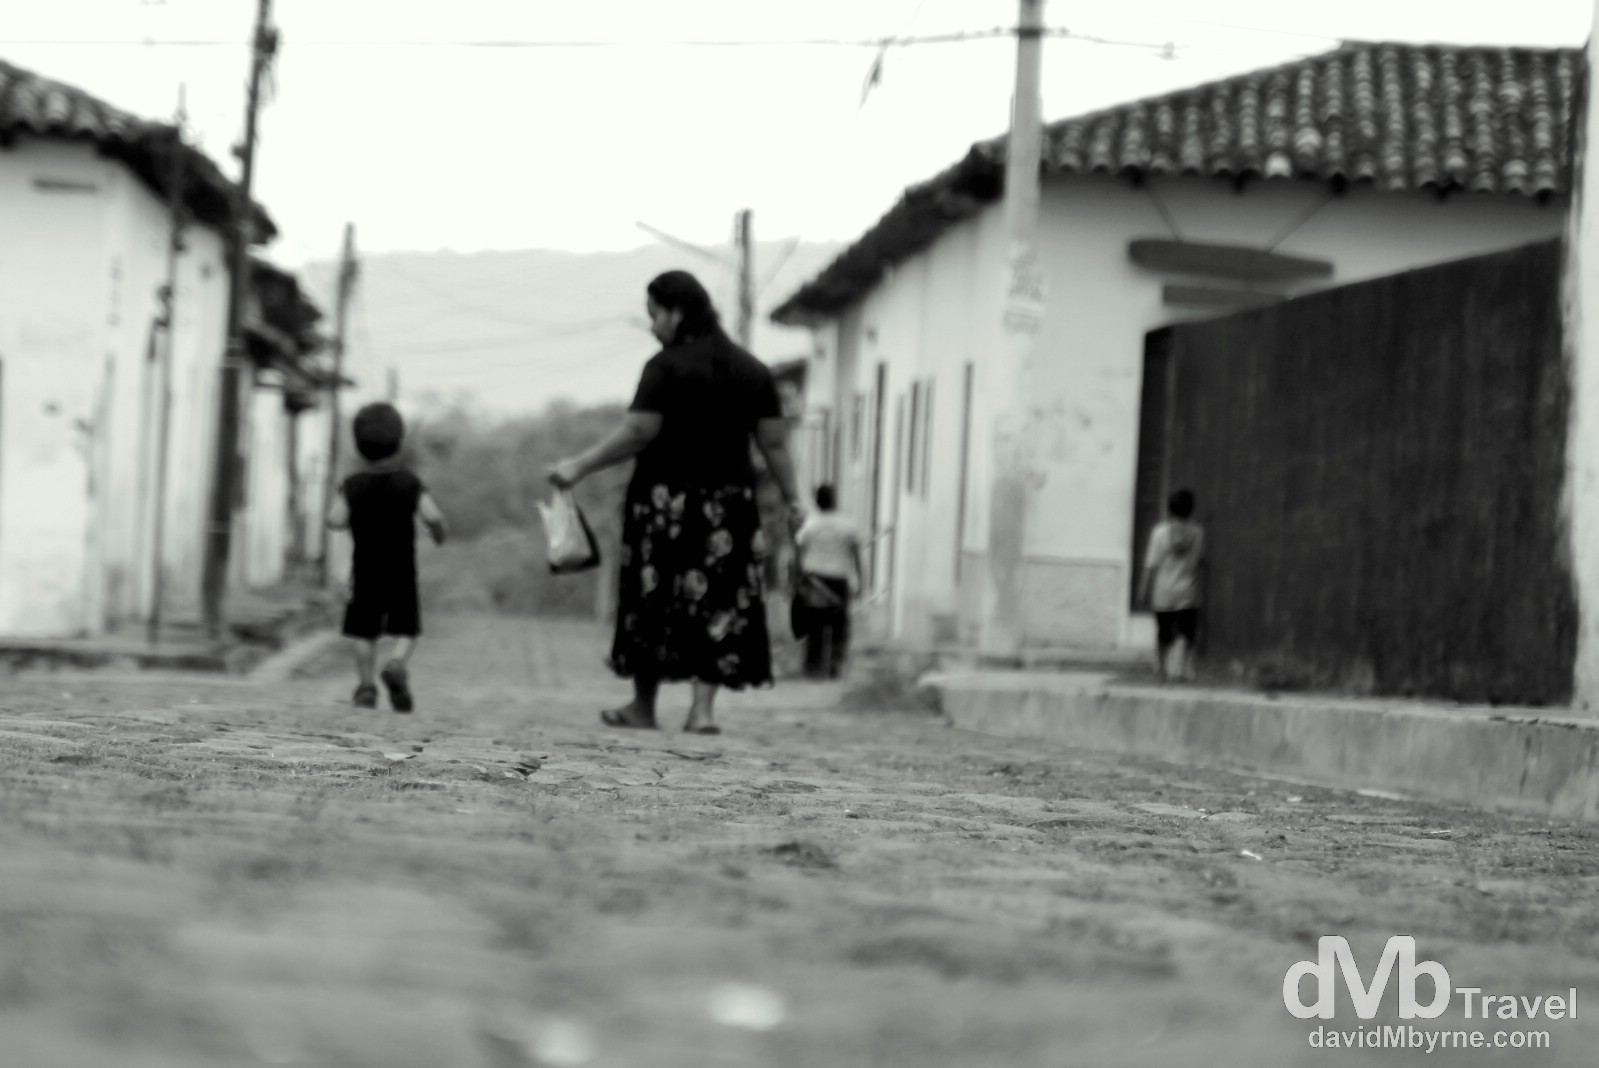 On the streets of Suchitoto, El Salvador. June 4th 2013.